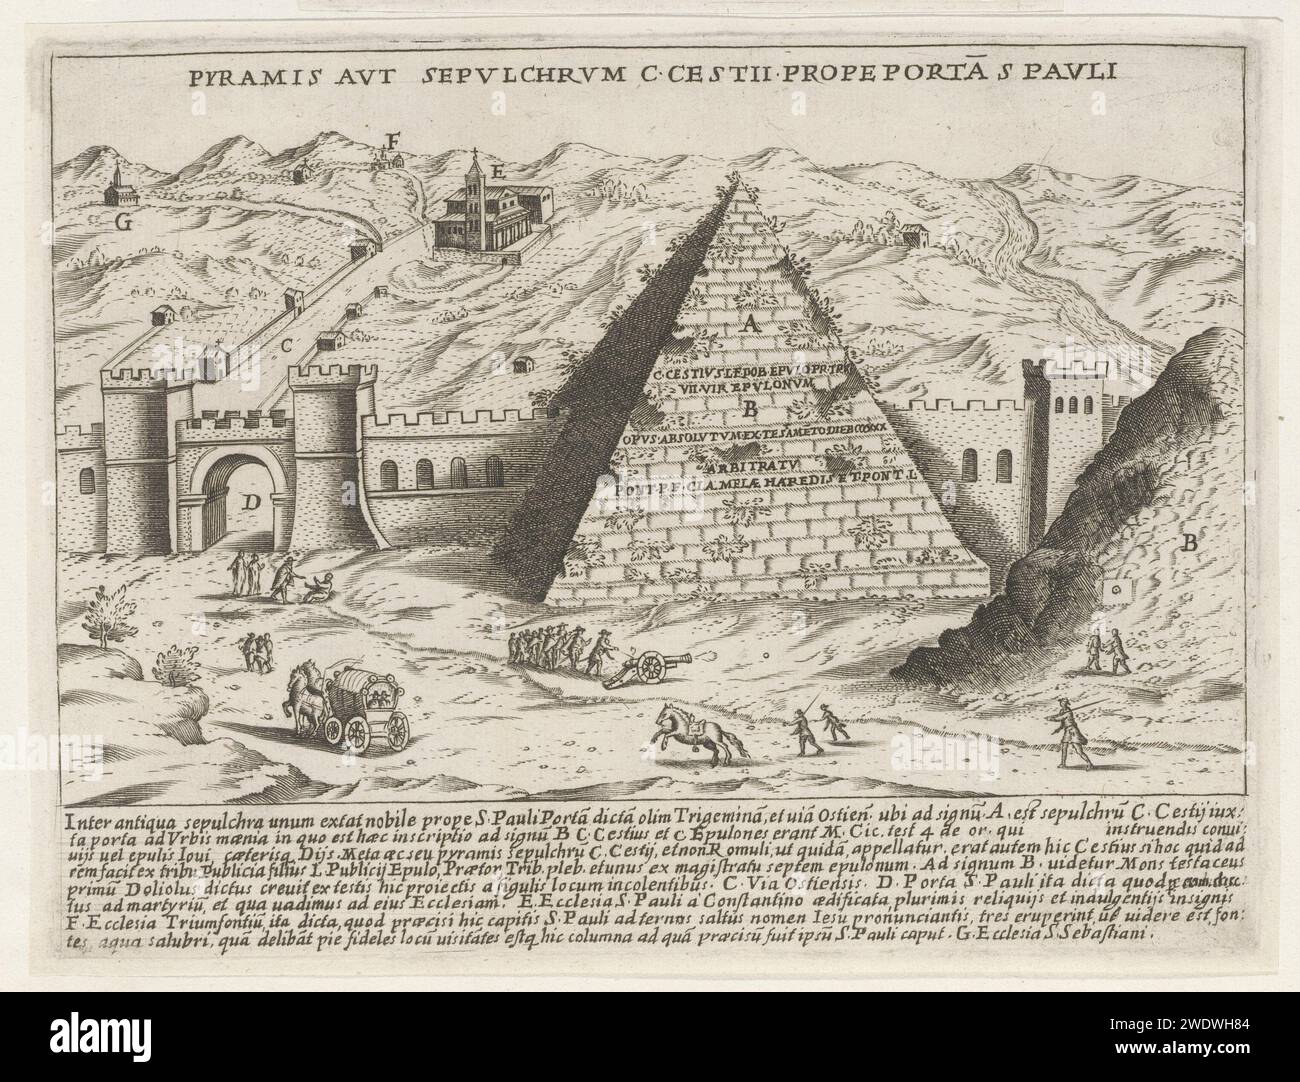 Piramide Van Cestius Te Rome, Giacomo Lauro, 1612 - 1628 print View of the pyramid of Cestius, the Aurelian wall and the Porta San Paolo in Rome. Text in Latin in STUDMARGE. The print is part of an album. Rome paper etching landscape with ruins. city-view, and landscape with man-made constructions. pyramid (historical grave form). city-gate Pyramid of Cestius. Aurelian wall. Porta San Paolo Stock Photo